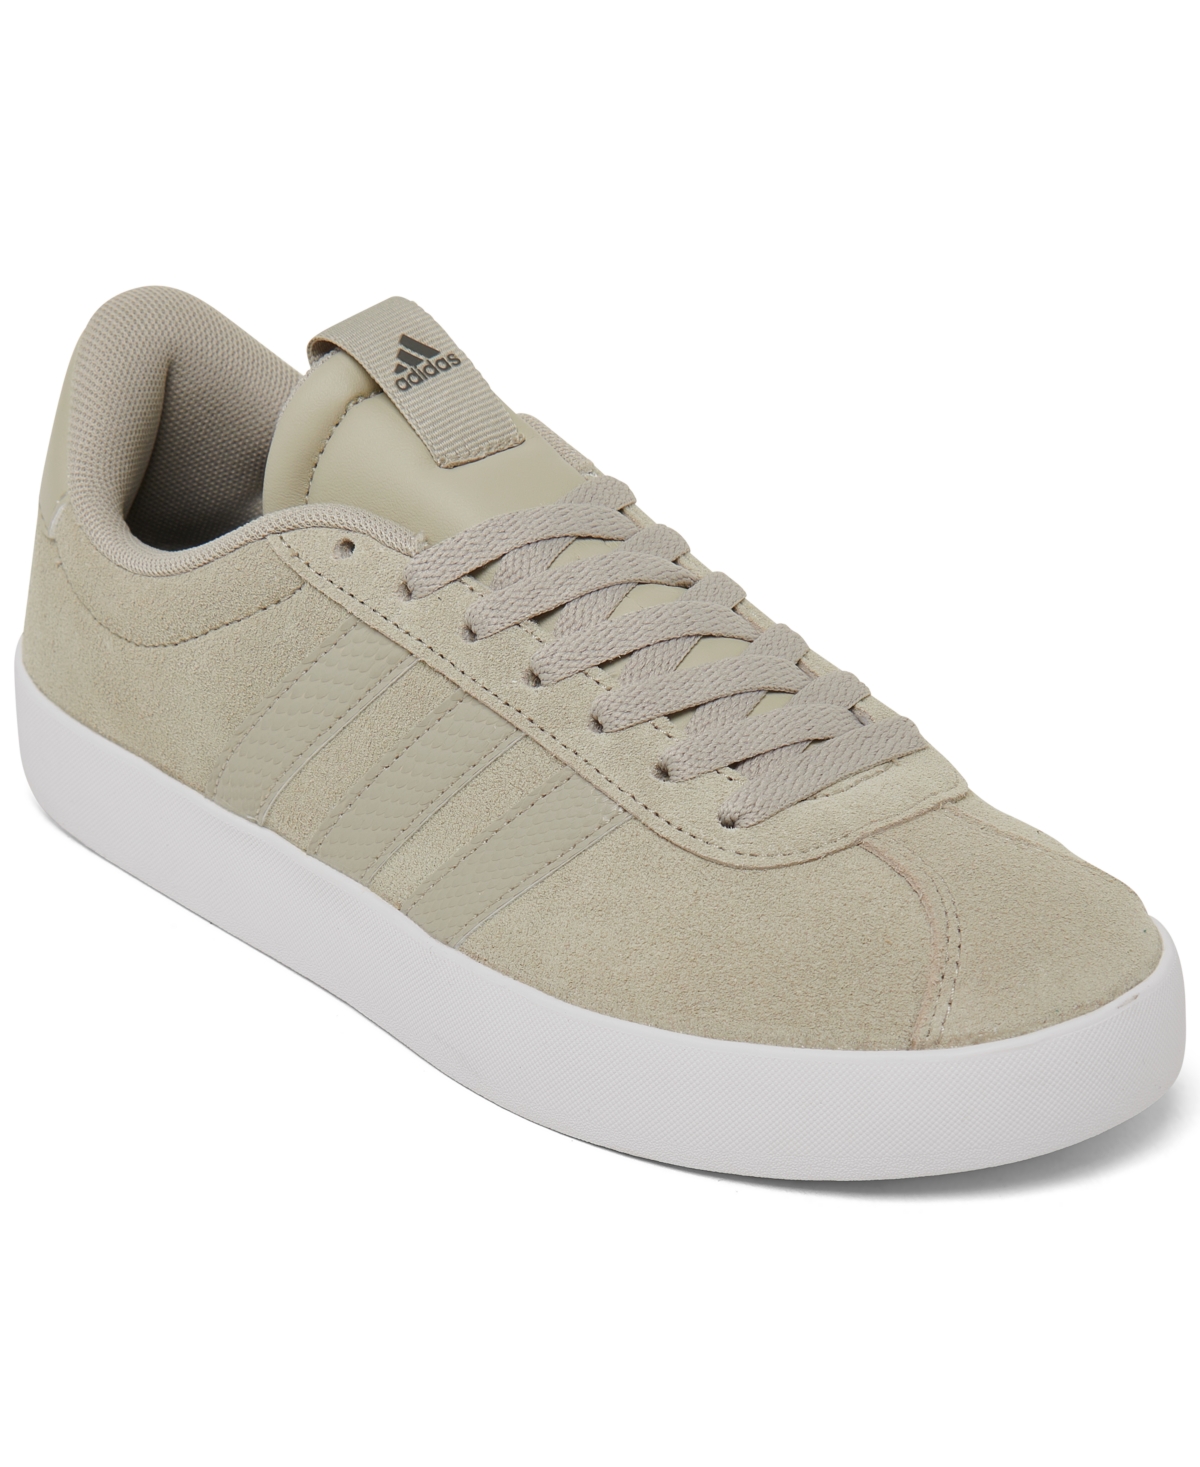 Adidas Originals Women's Vl Court 3.0 Casual Sneakers From Finish Line In Putty Gray